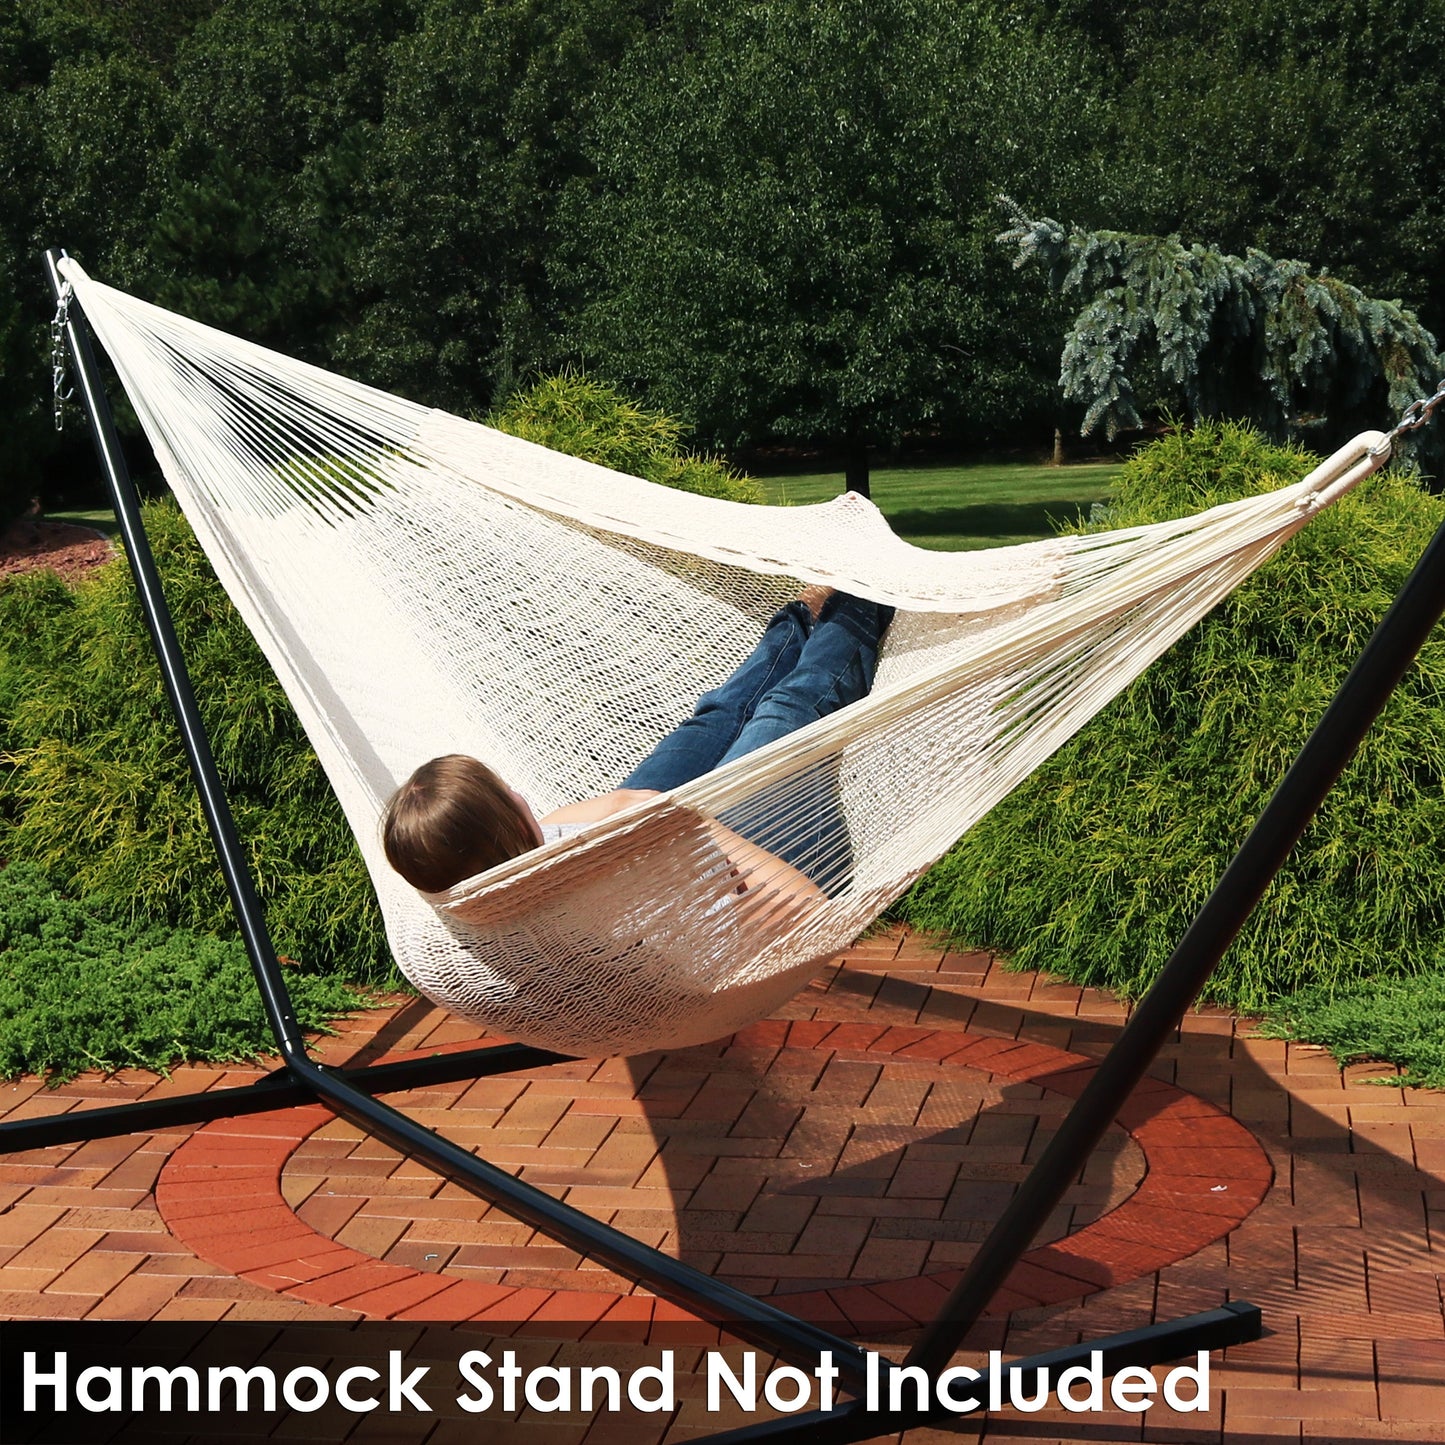 Handwoven XXL Mayan Hammock | Family Size | Thick Cotton Cord